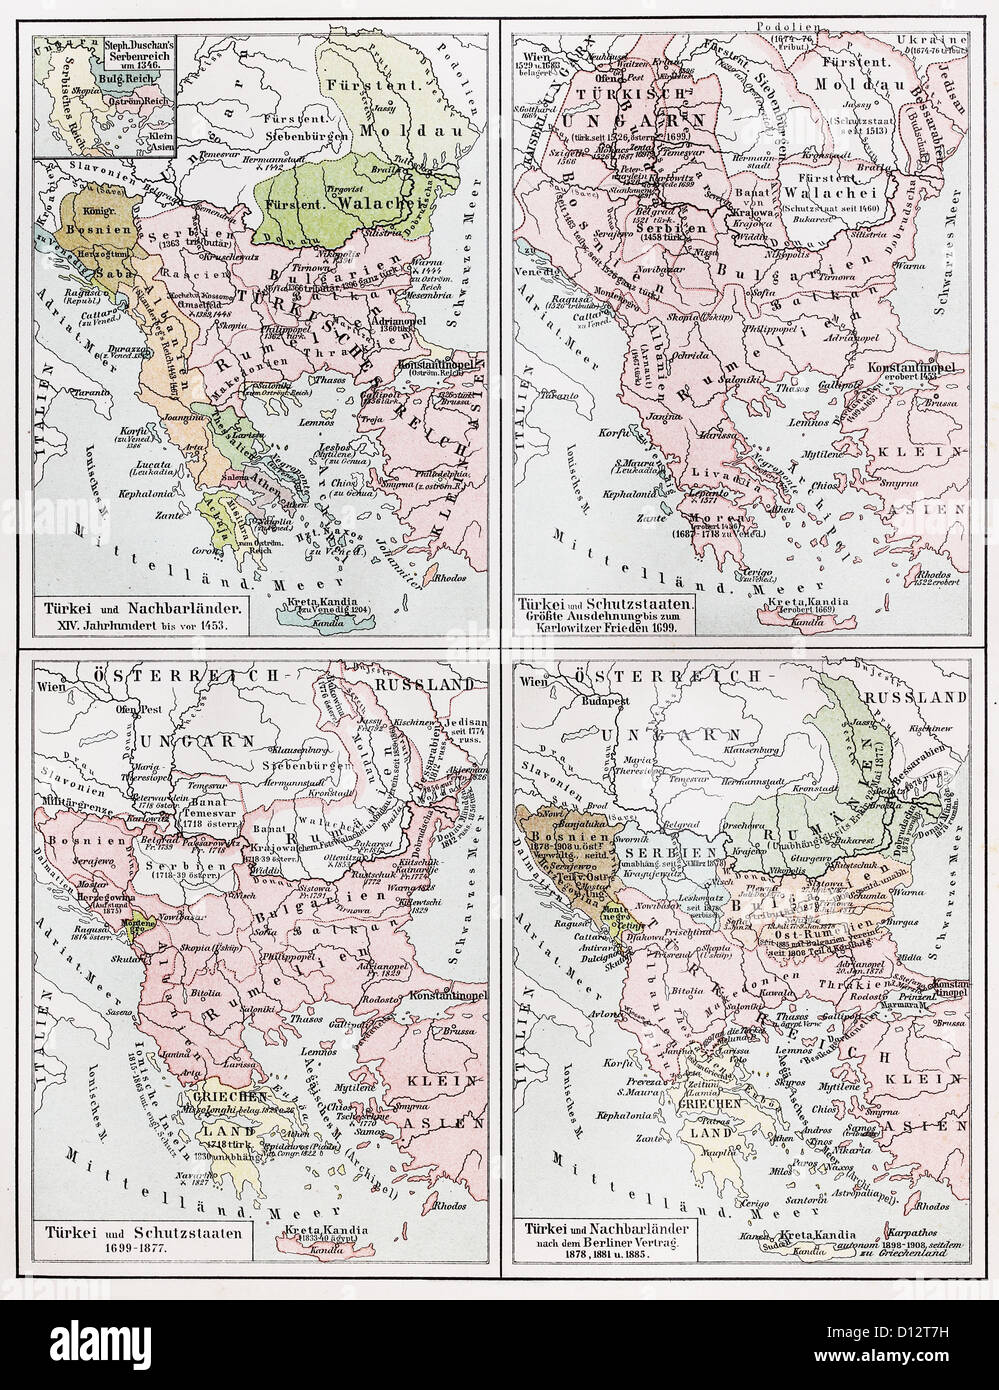 Vintage map representing the Turkish Empire European territories between 1453 and 1885 Stock Photo